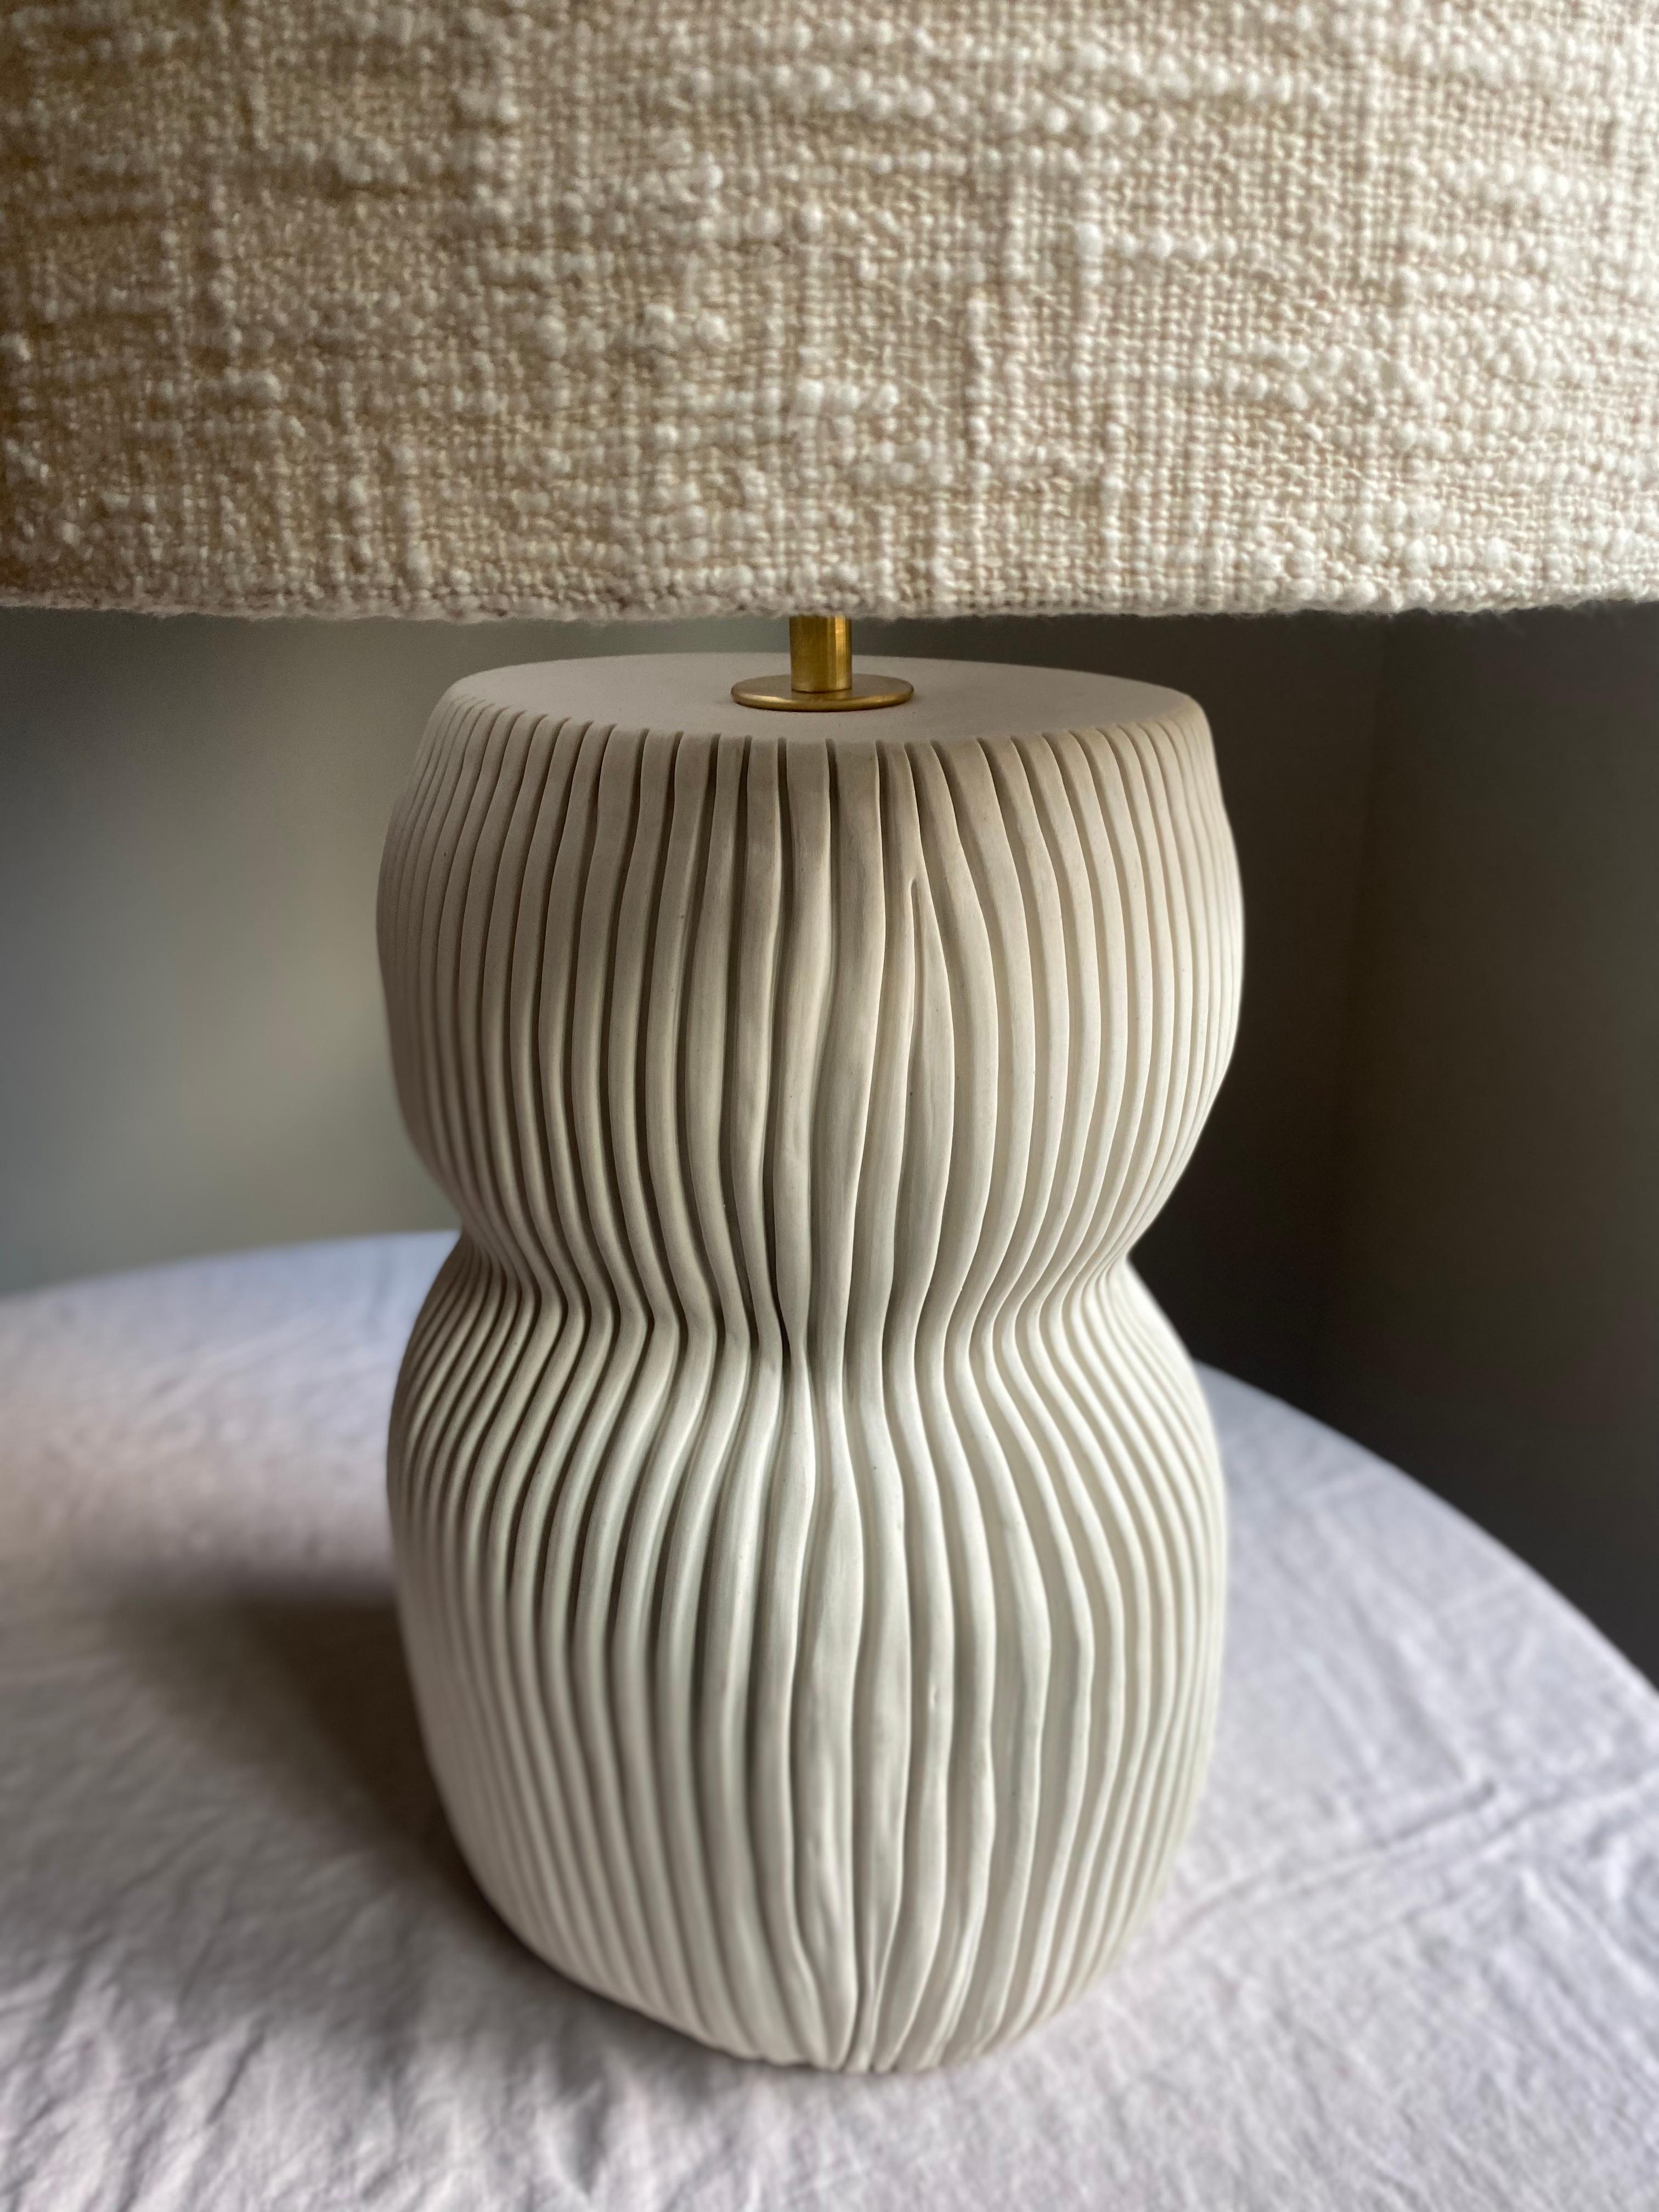 Other Organic Curvy Table Lamp #1 For Sale